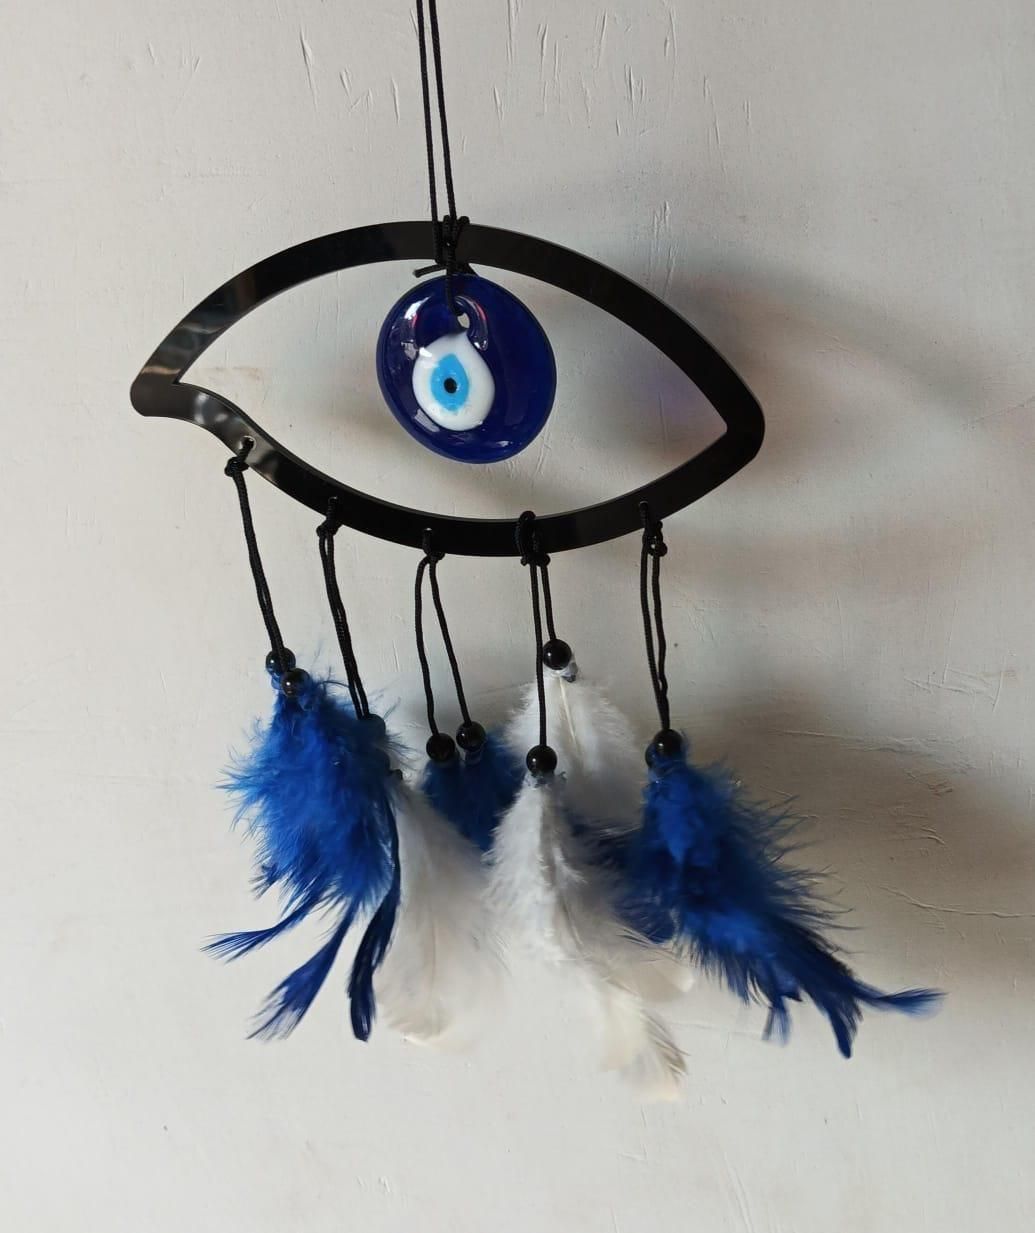 Car Rear View Mirror Decor Ornament Accessories Good Luck Charm Protection Interior Wall Hanging showpiece Dream Catchers (Evil Eye)